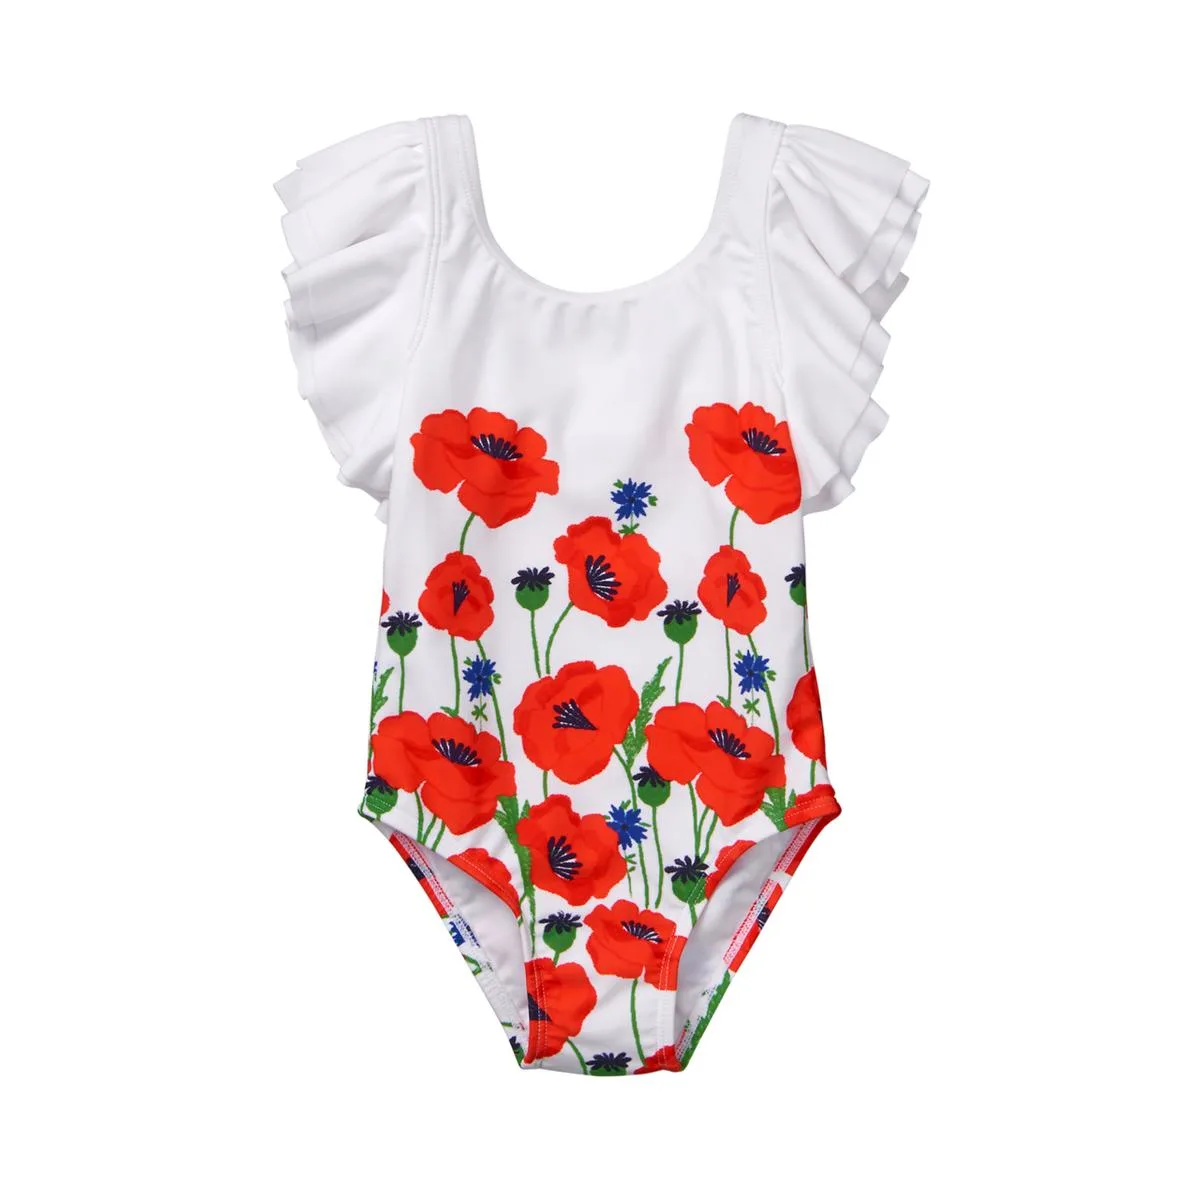 poppy Most Adorable Toddler Girl Swimsuits These are the most adorable toddler girl swimsuits I have seen this season. If you're planning on taking your toddler to the beach then check out these tips for a happy vacation.  There are super cute girl bathing suits to fit any budget.  This post does contain affiliate links, any purchase you make doesn't cost you anything and helps support this site.